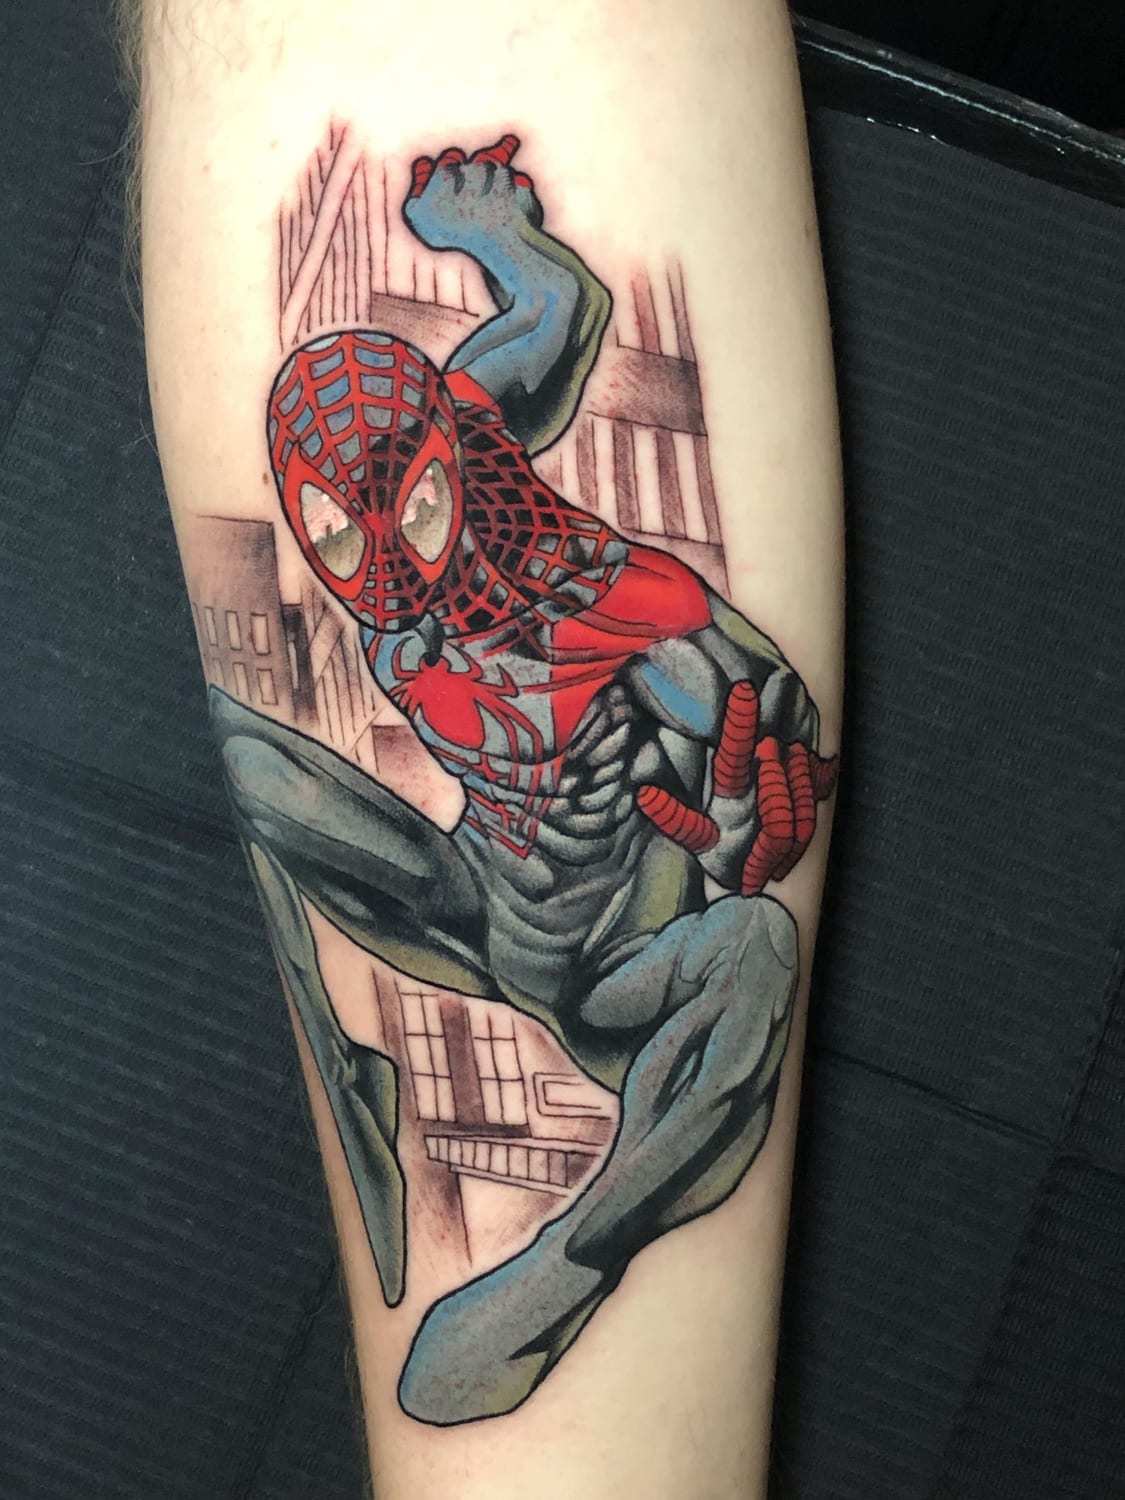 Miles morales done at bright side tattoo Copenhagen by kest234